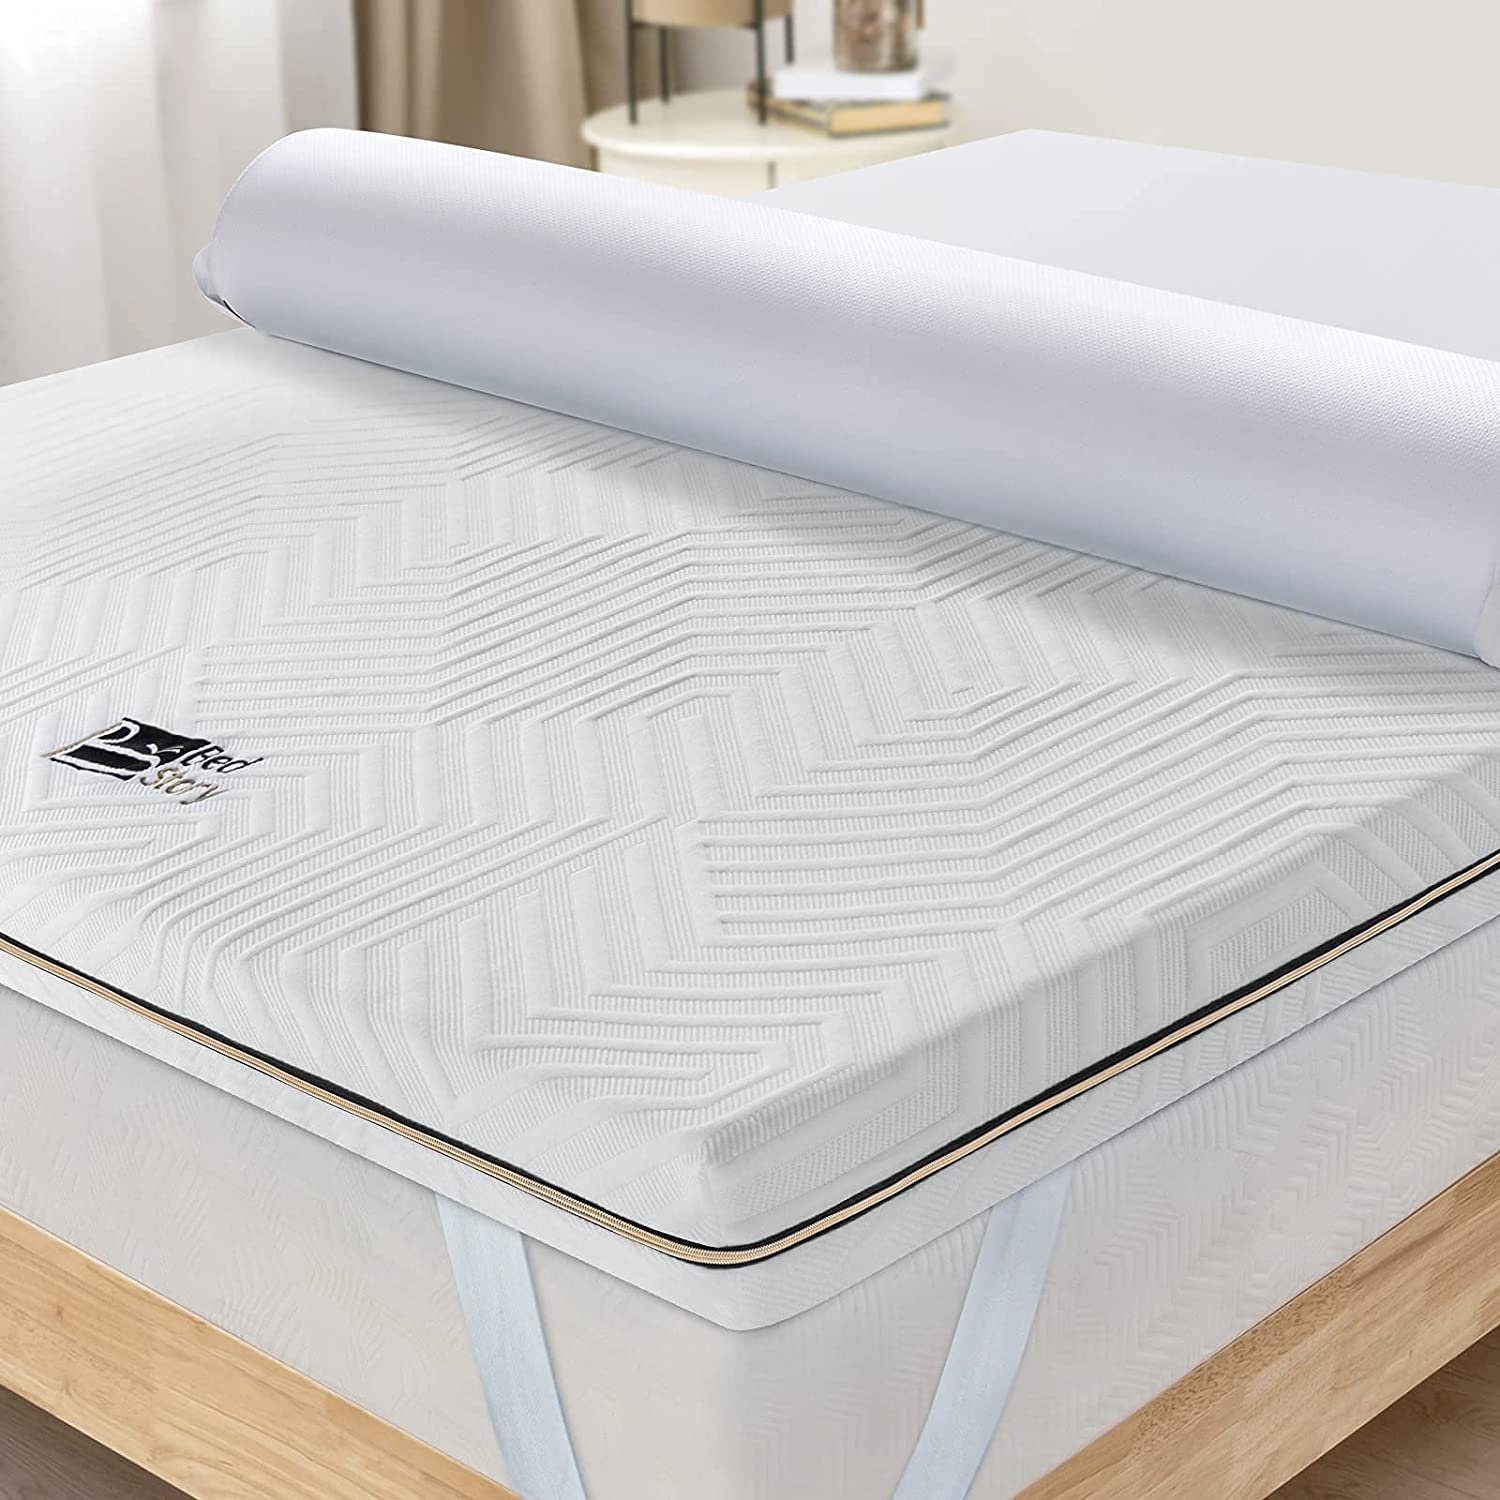 7.5 cm Height Gel Topper with Removable and Washable Cover BedStory Mattress Topper 90 x 200 cm Breathable and Comfortable Mattress Topper for Box Spring Bed and Uncomfortable Beds Sofa Bed 